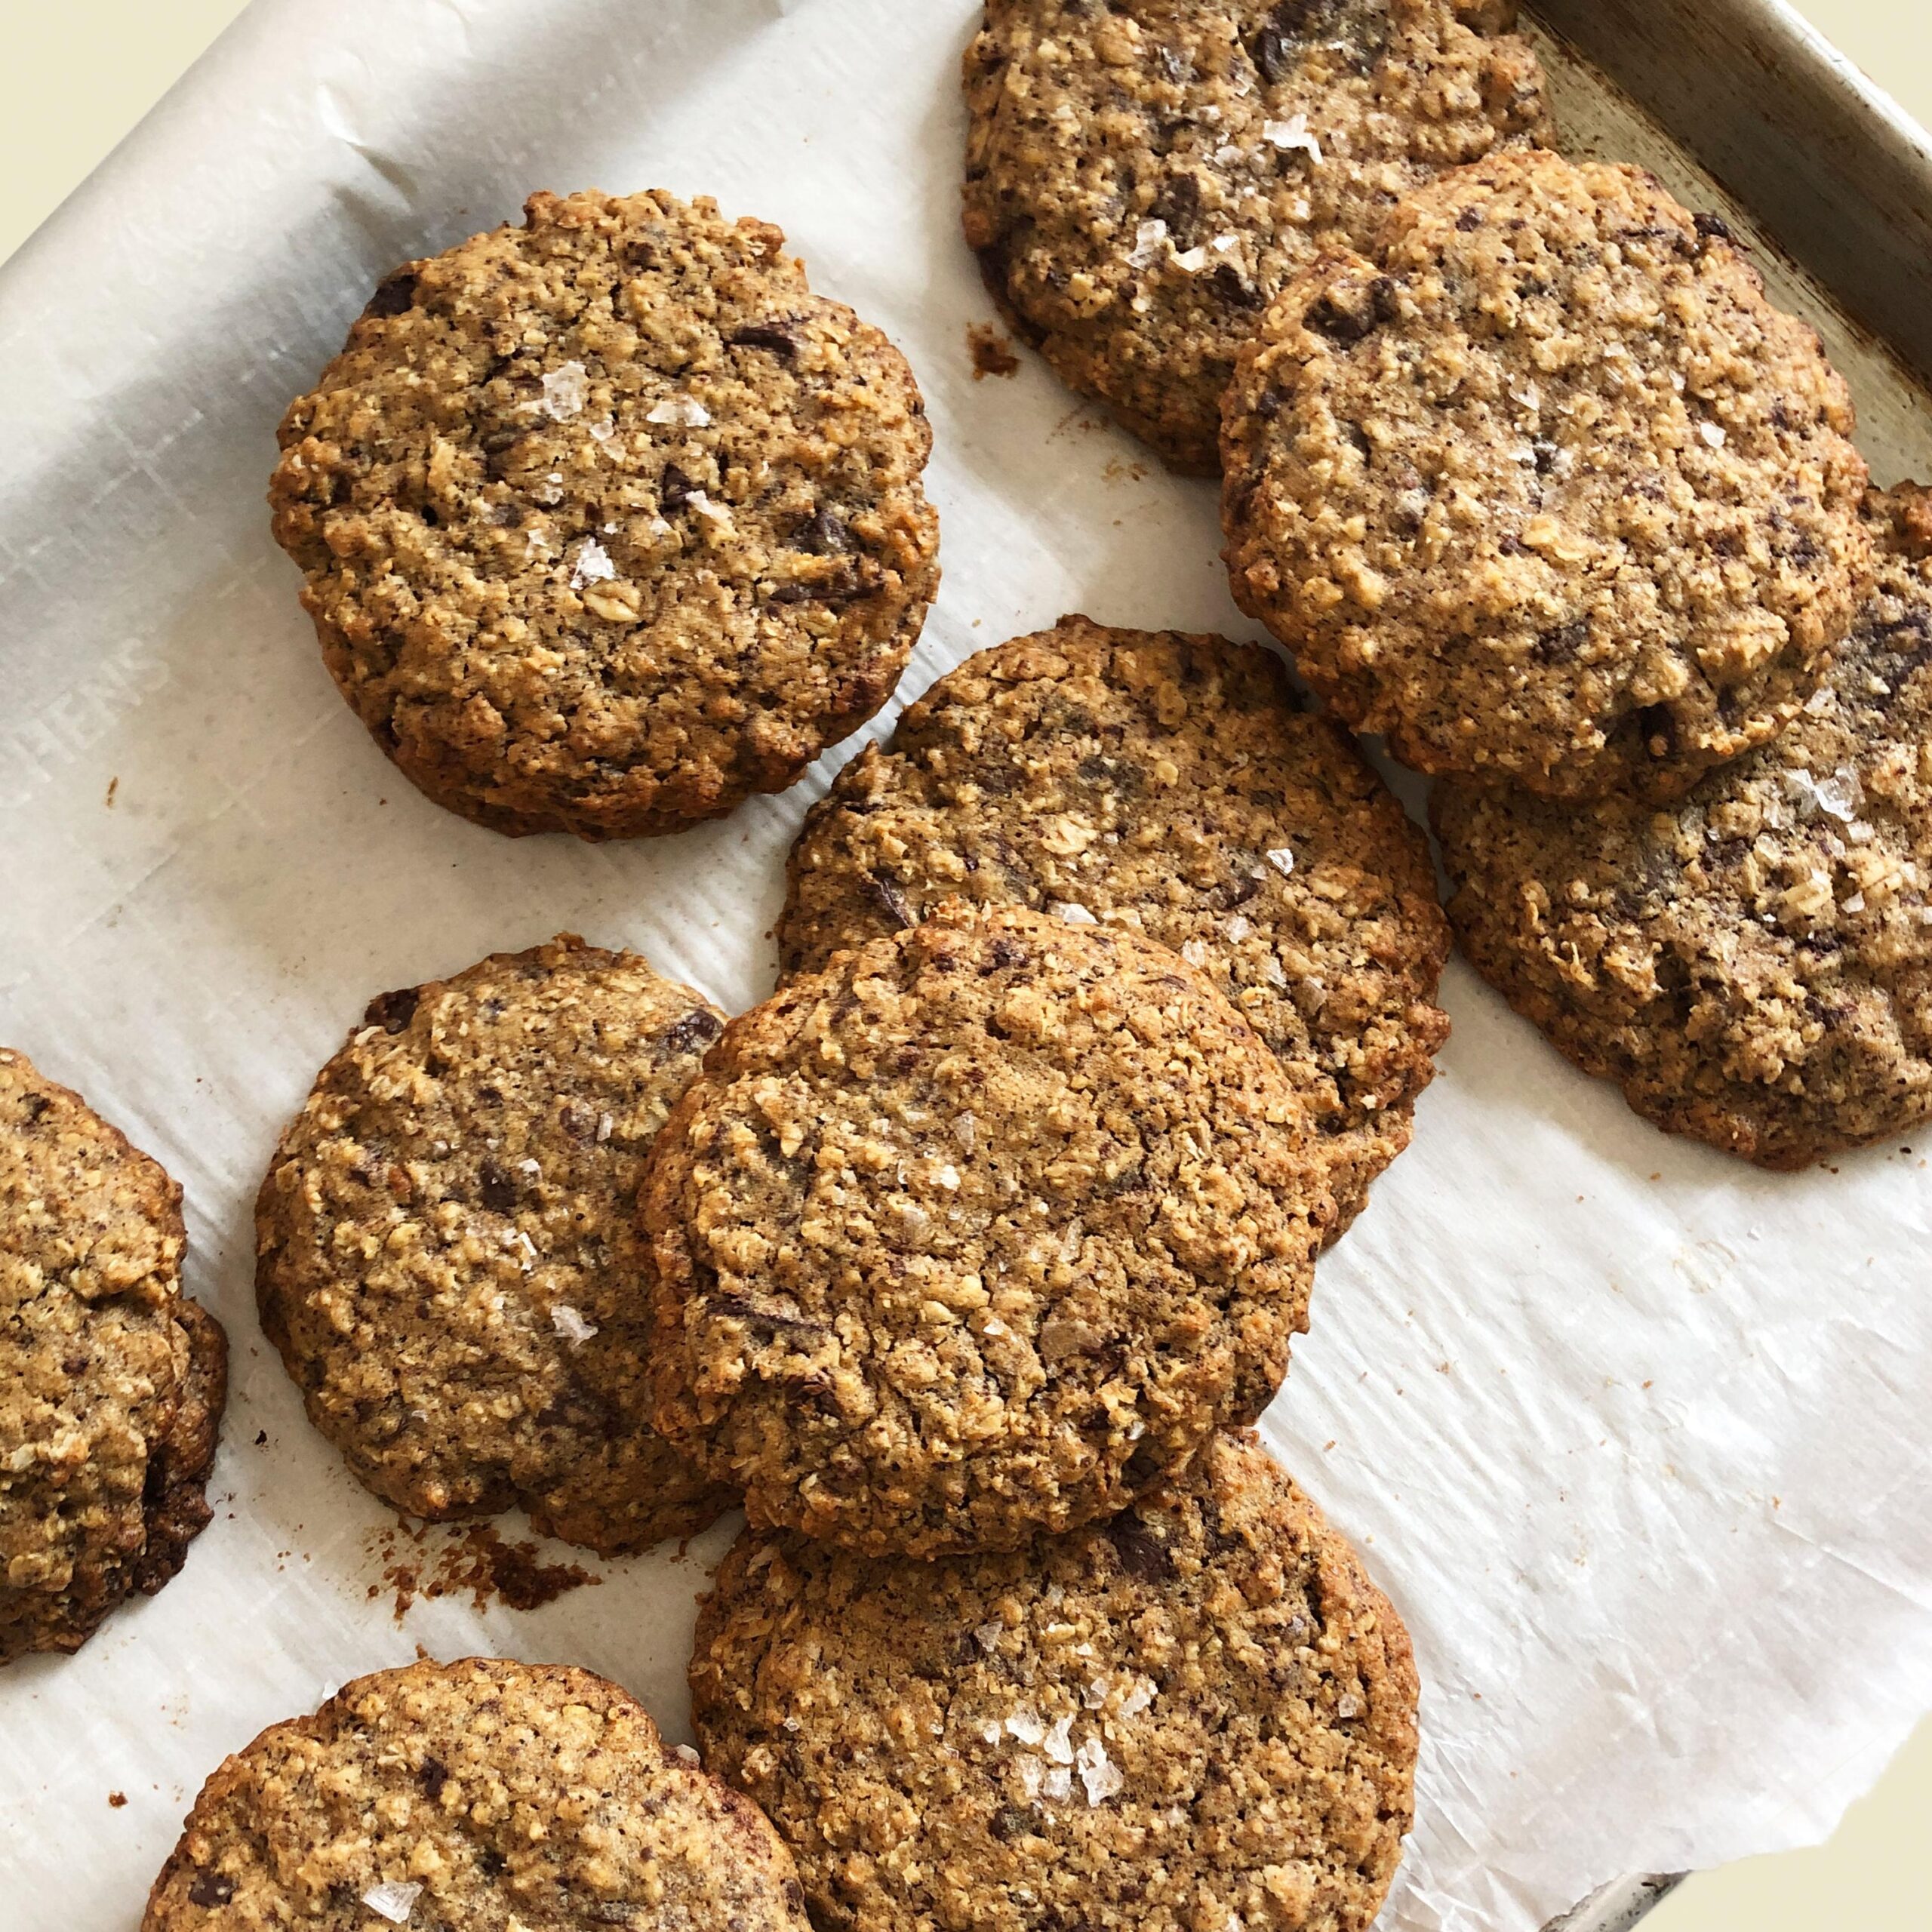  Enjoy a warm and gooey Oatmeal Coffee Cookie fresh out of the oven!